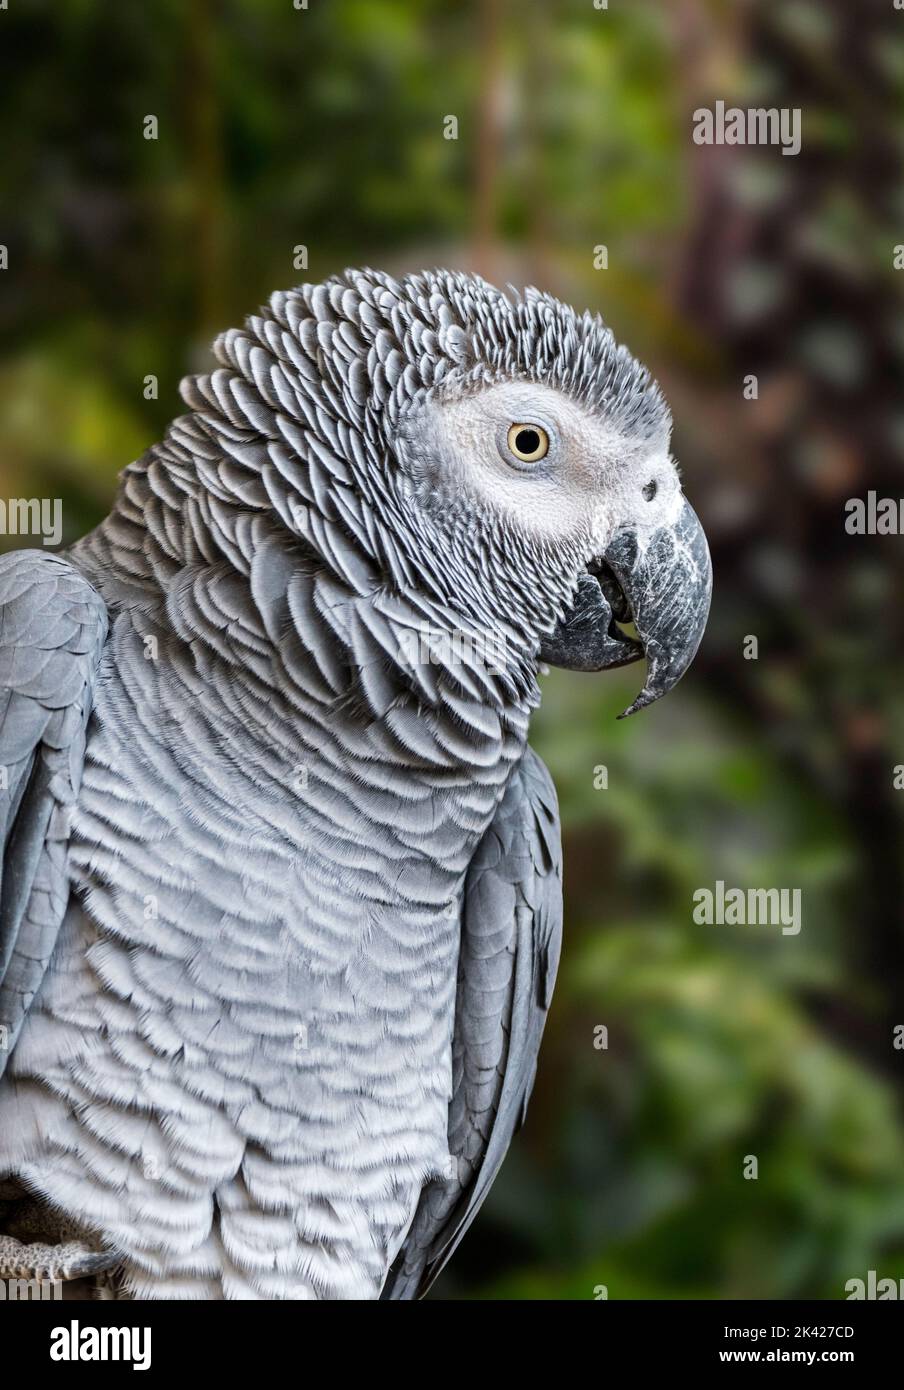 Congo grey parrot / Congo African grey parrot / African grey parrot (Psittacus erithacus / Psittacus cinereus) close-up portrait in forest Stock Photo